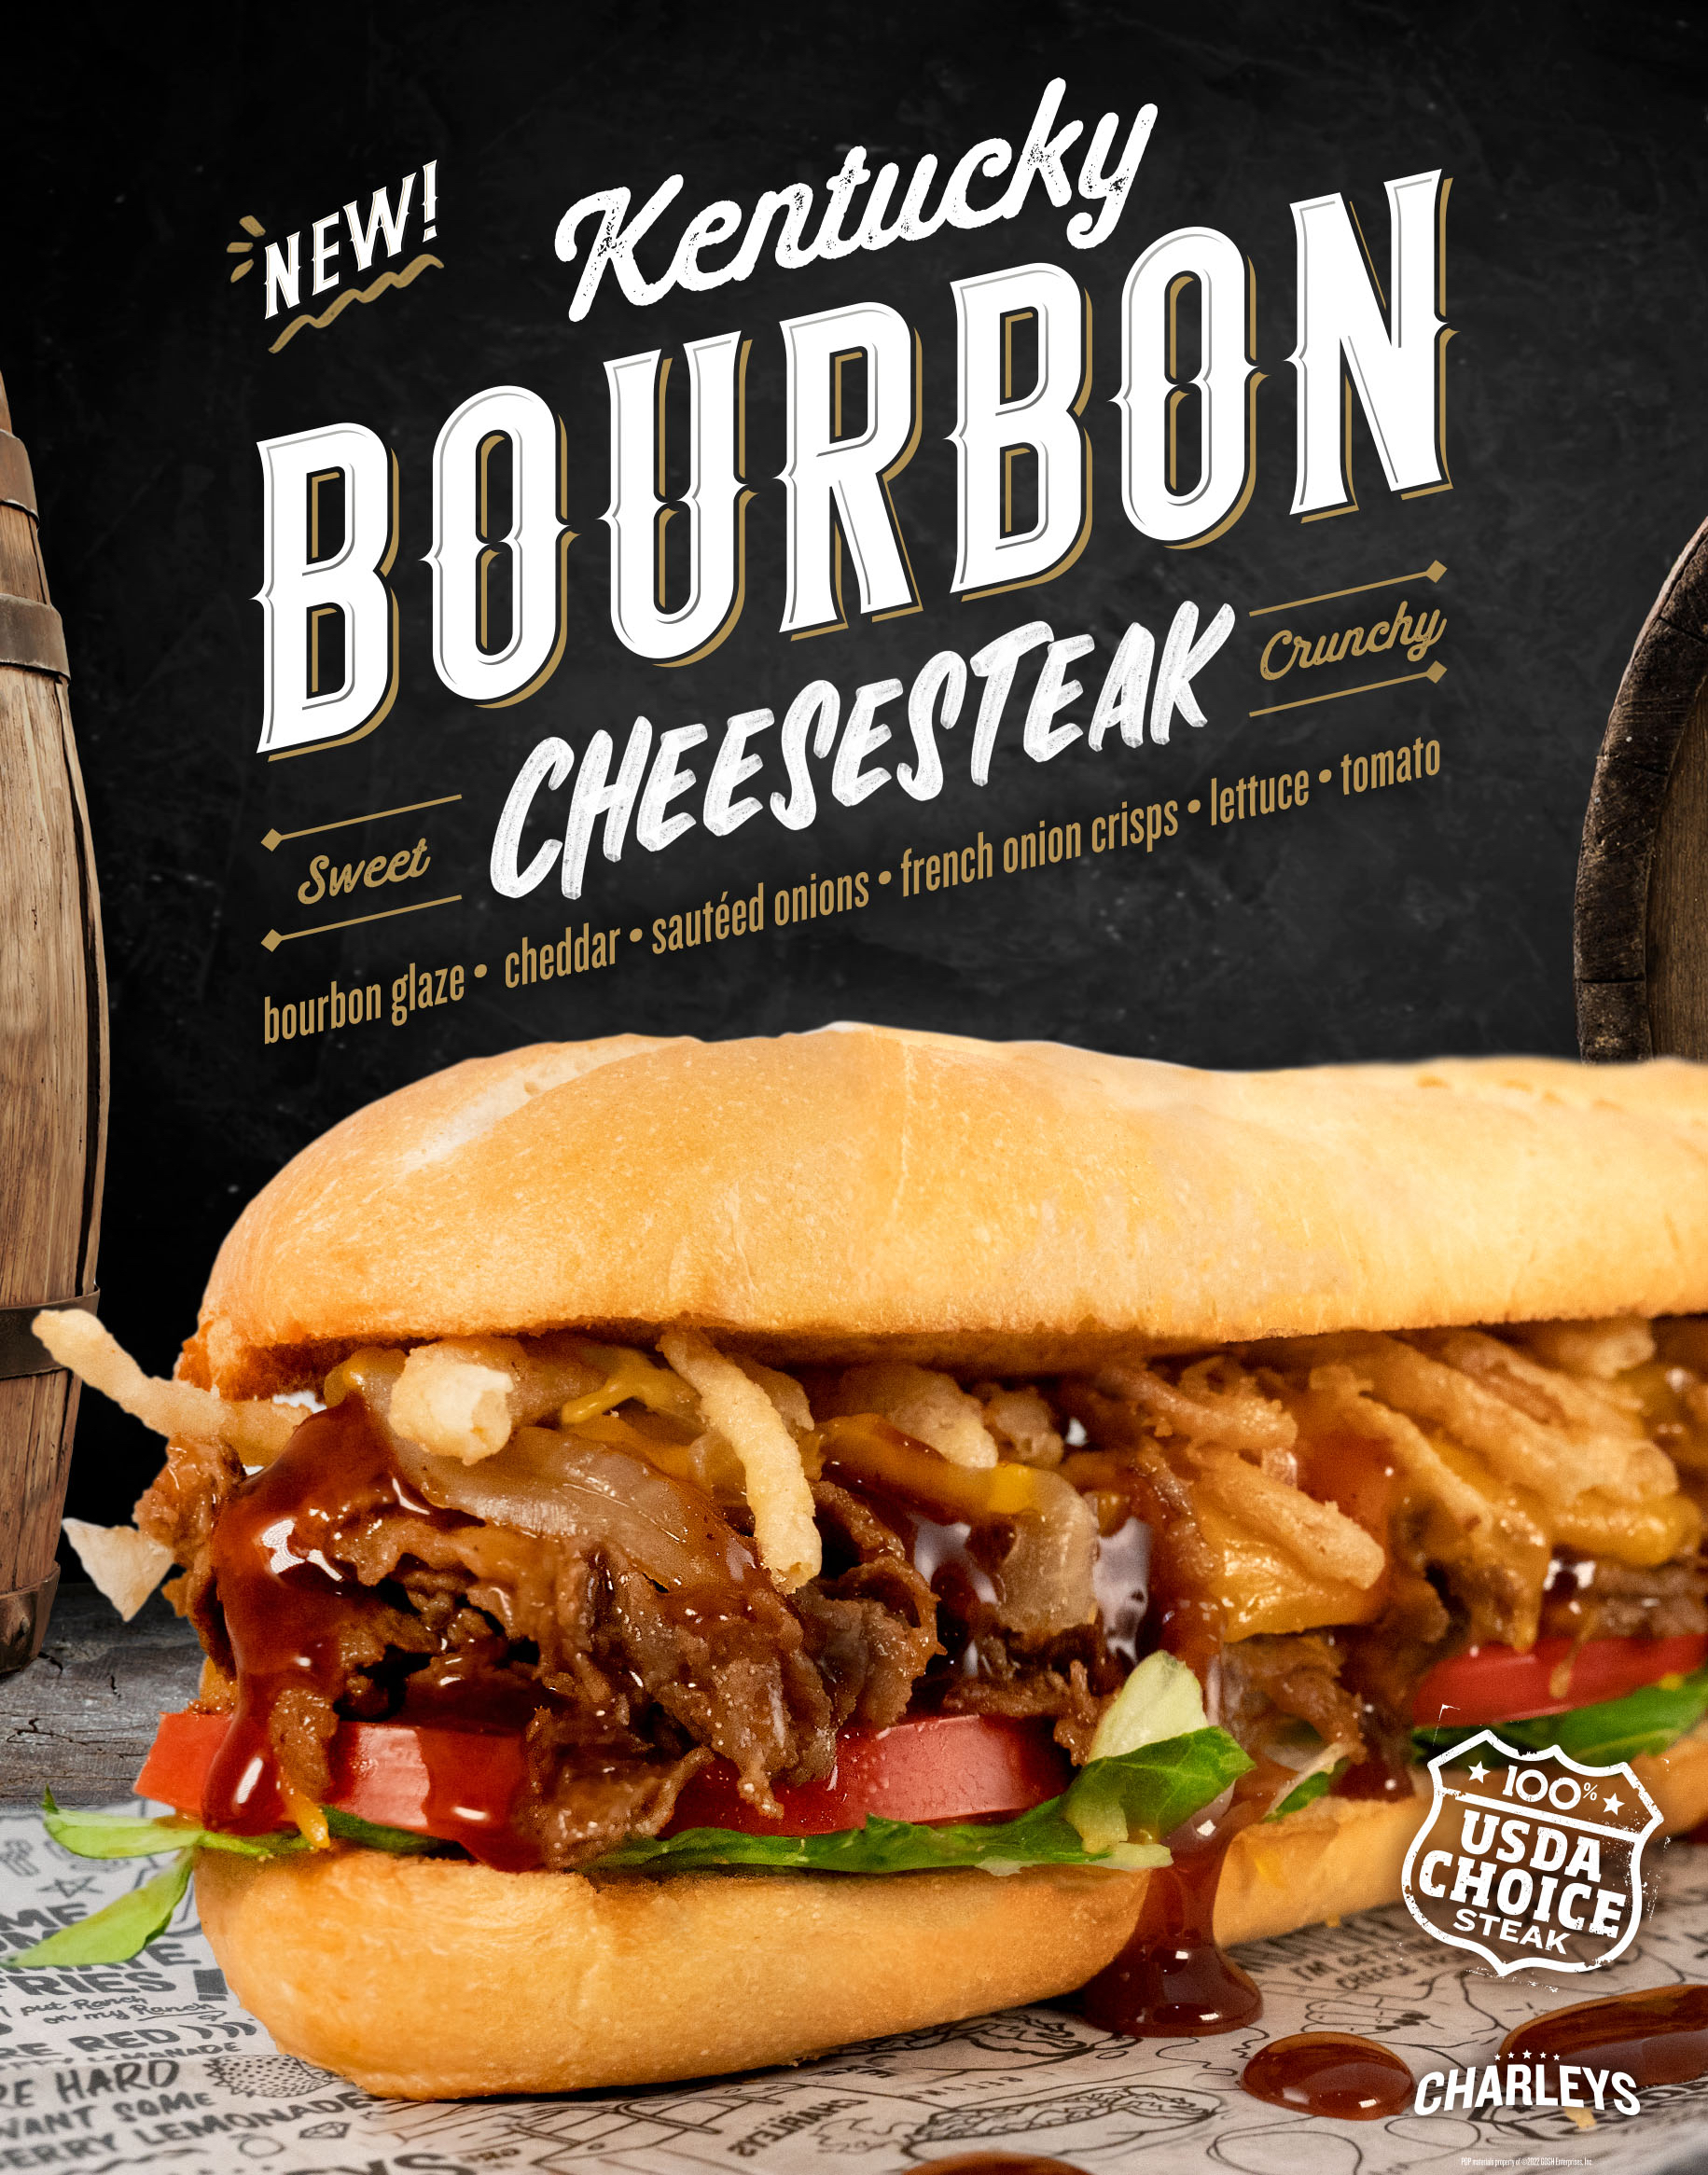 Charleys Cheesesteaks is off to the races in 2023 - with a Kentucky Bourbon Cheesesteak!